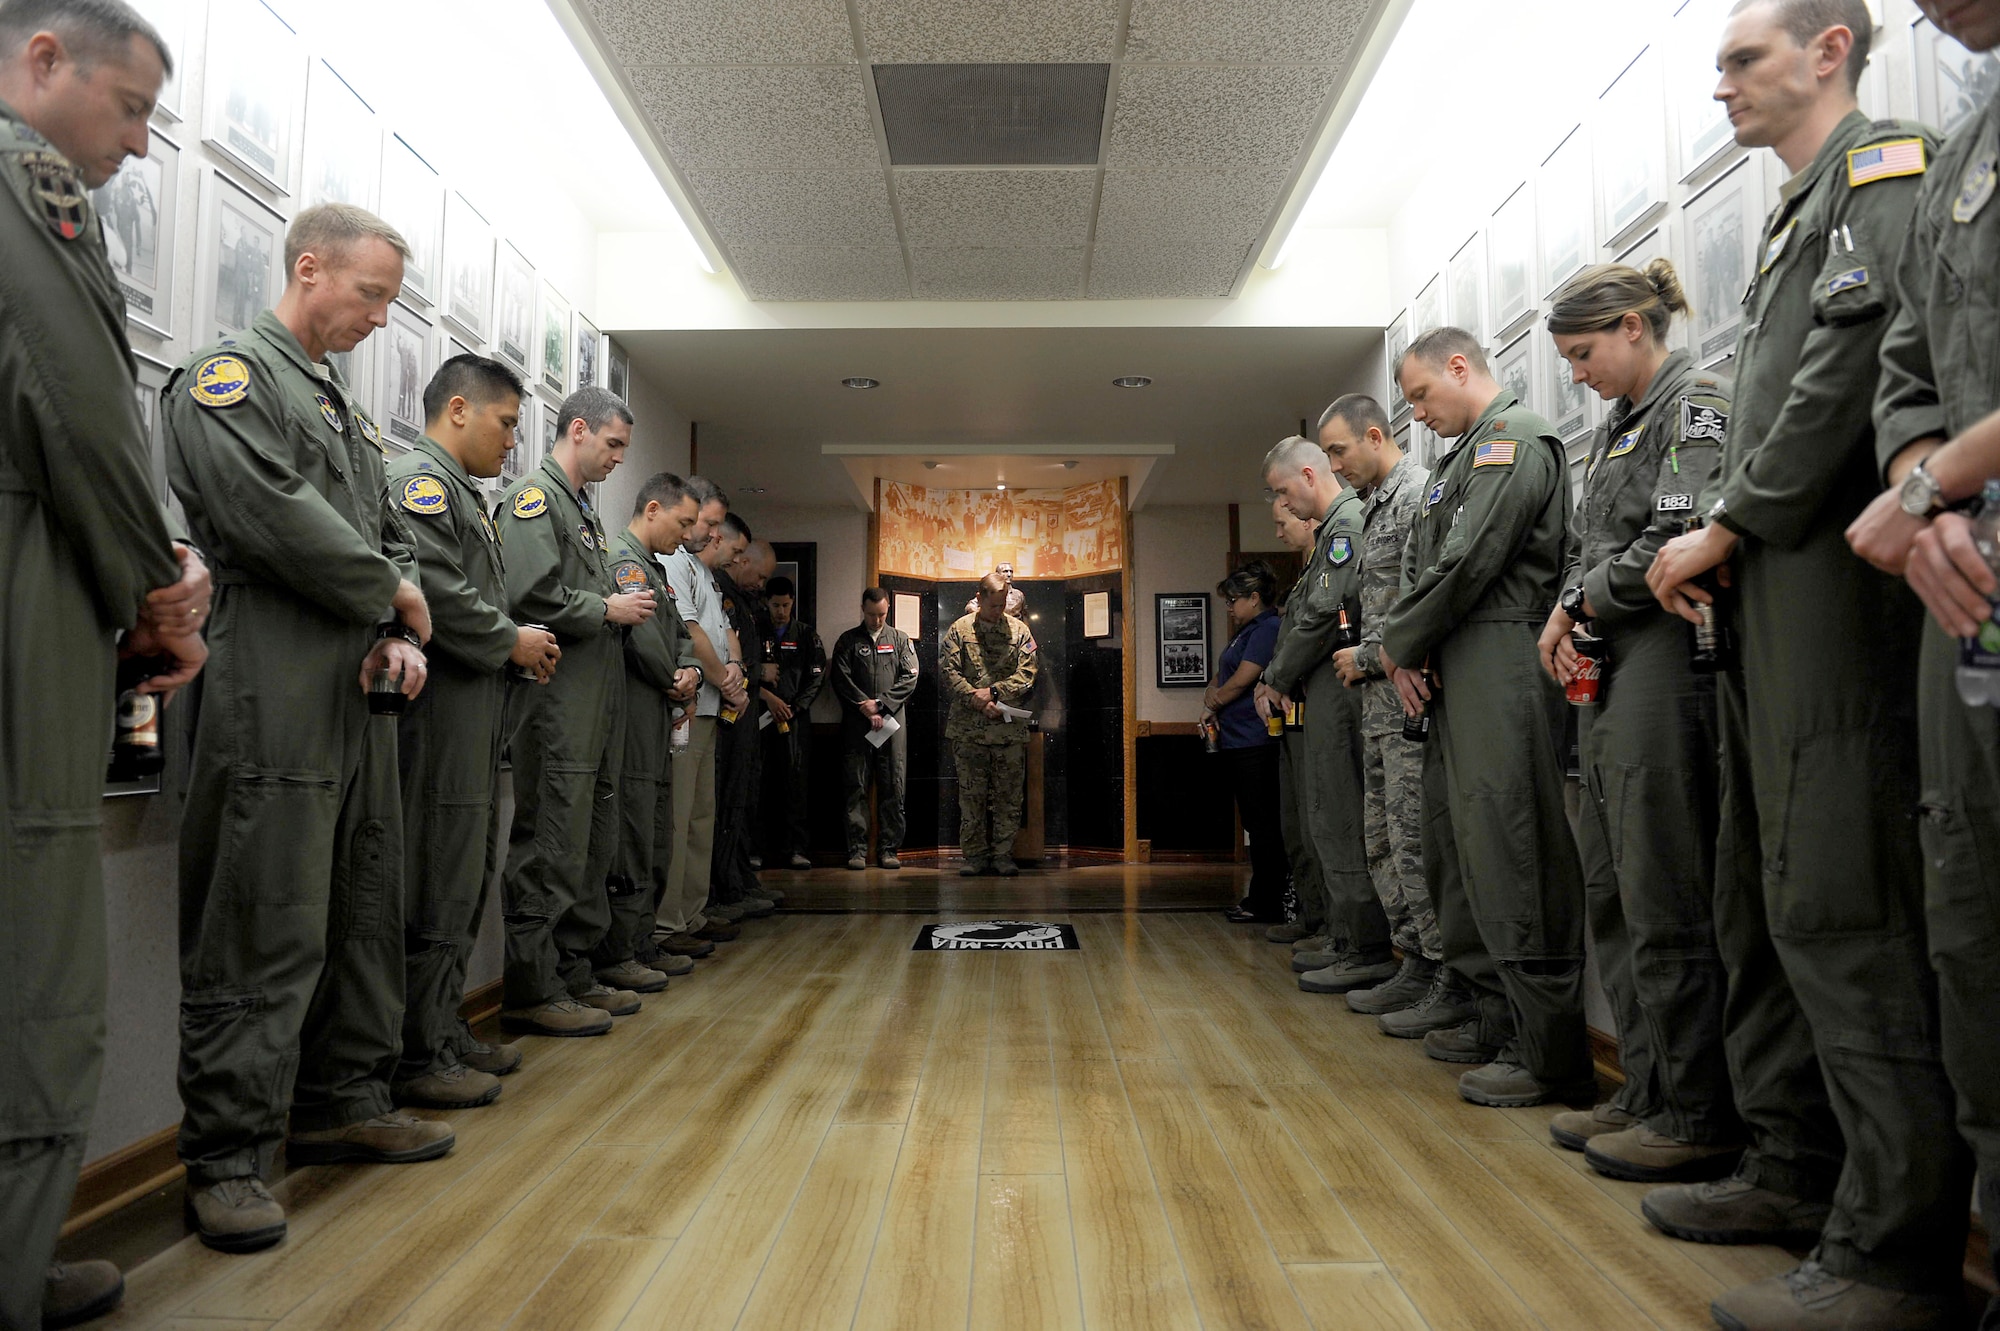 Members of the 99th Flying Training Squadron line Freedom Flyer hallway of Hangar 12 during a roll call for the NATO Air Training Command Afghanistan, NATC-A NINE, April 27, 2018, Randolph AFB, Texas. On this day in 2011 a shooter opened fire at the Kabul International Airport, killing eight Airmen and one American contractor. Among the victims was Maj. Jeff ‘Oz’ Ausborn, who was deployed from the 99th FTS. (U.S. Air Force photo by Tech. Sgt. Ave I. Young)